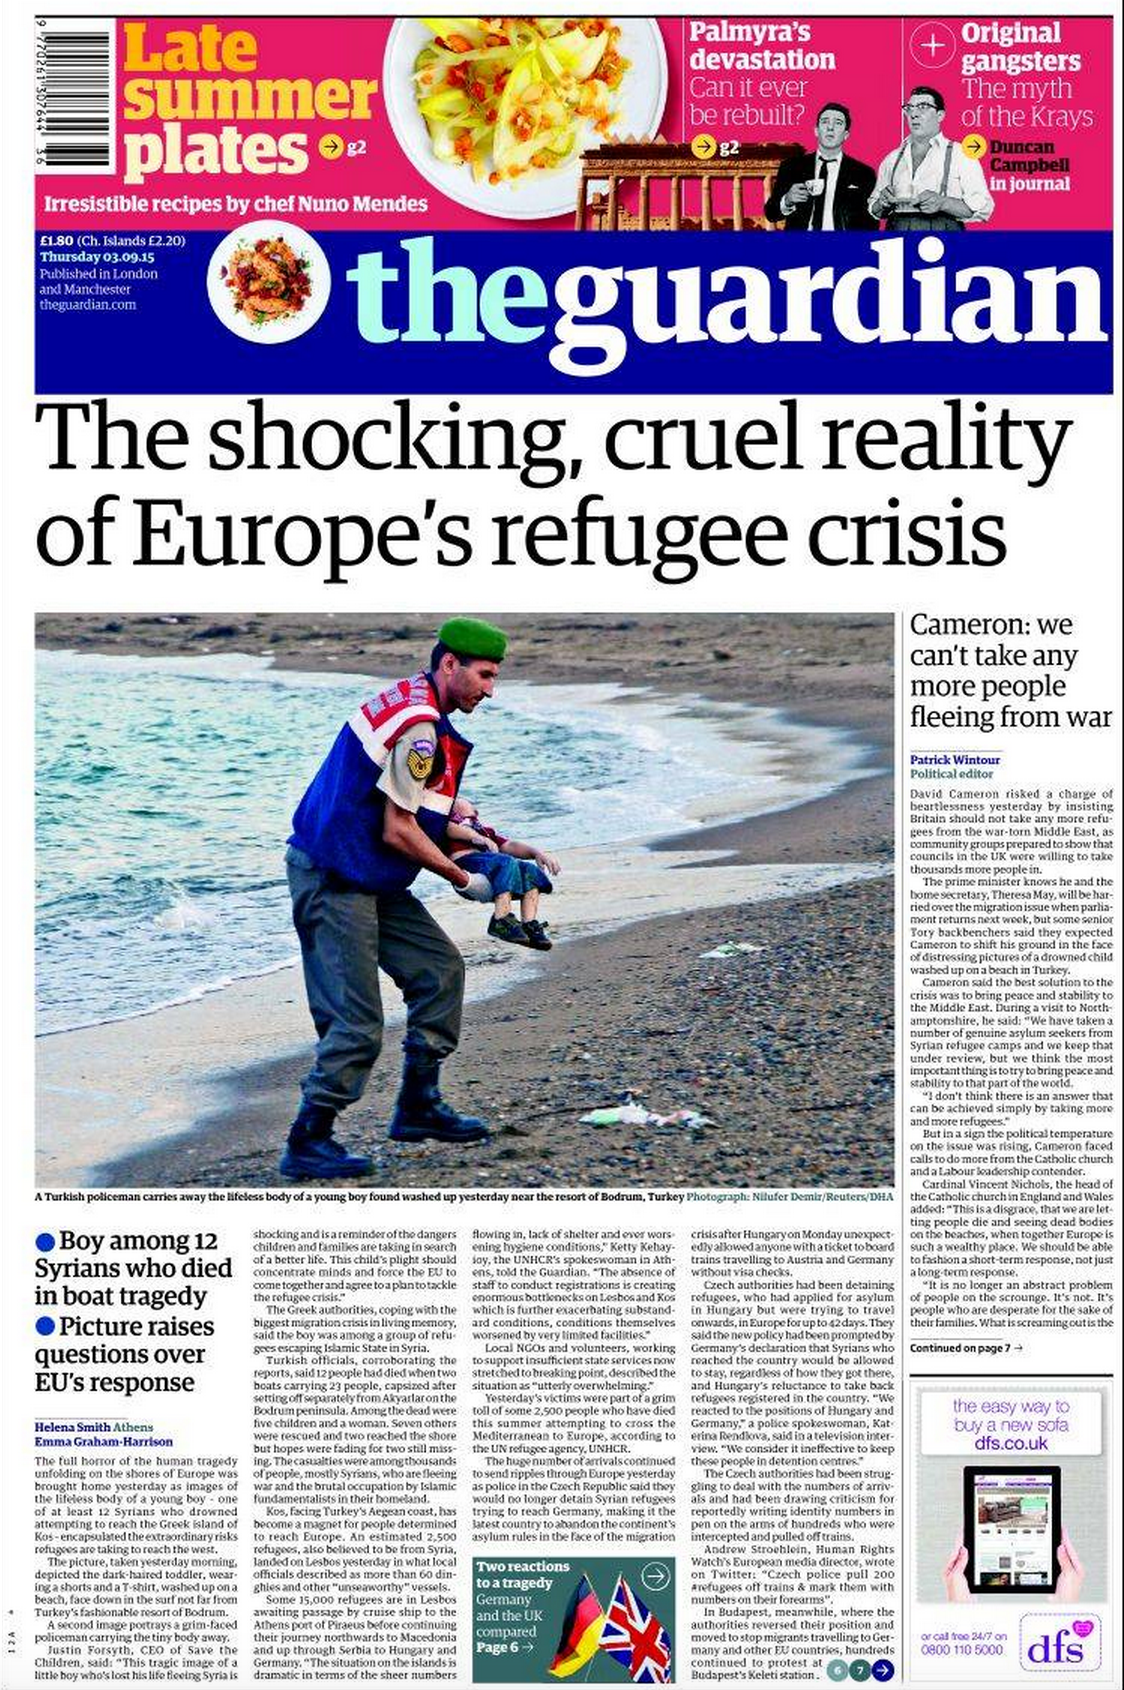 Drowned Migrant Boy The Guardian front page